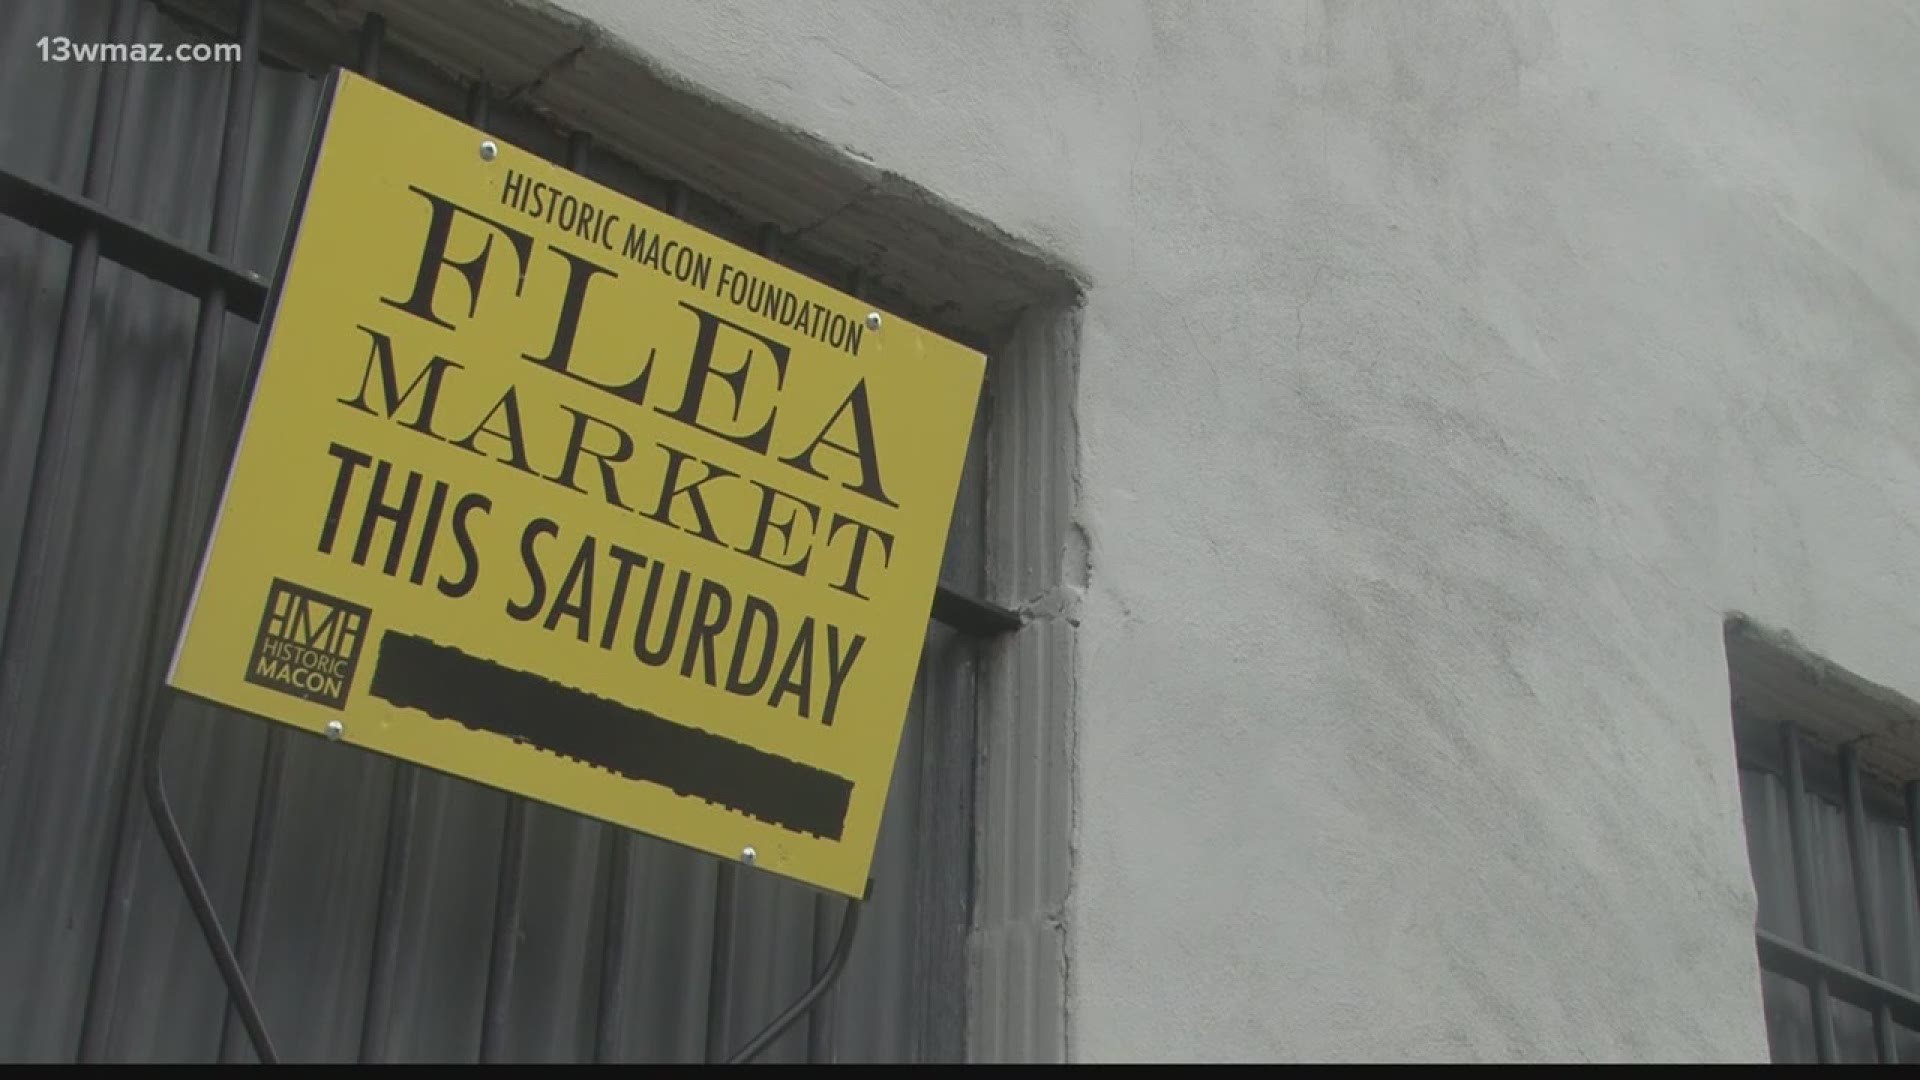 The flea market helps fund Historic Macon so they can carry out their mission to revitalize communities by preserving architecture and sharing history.